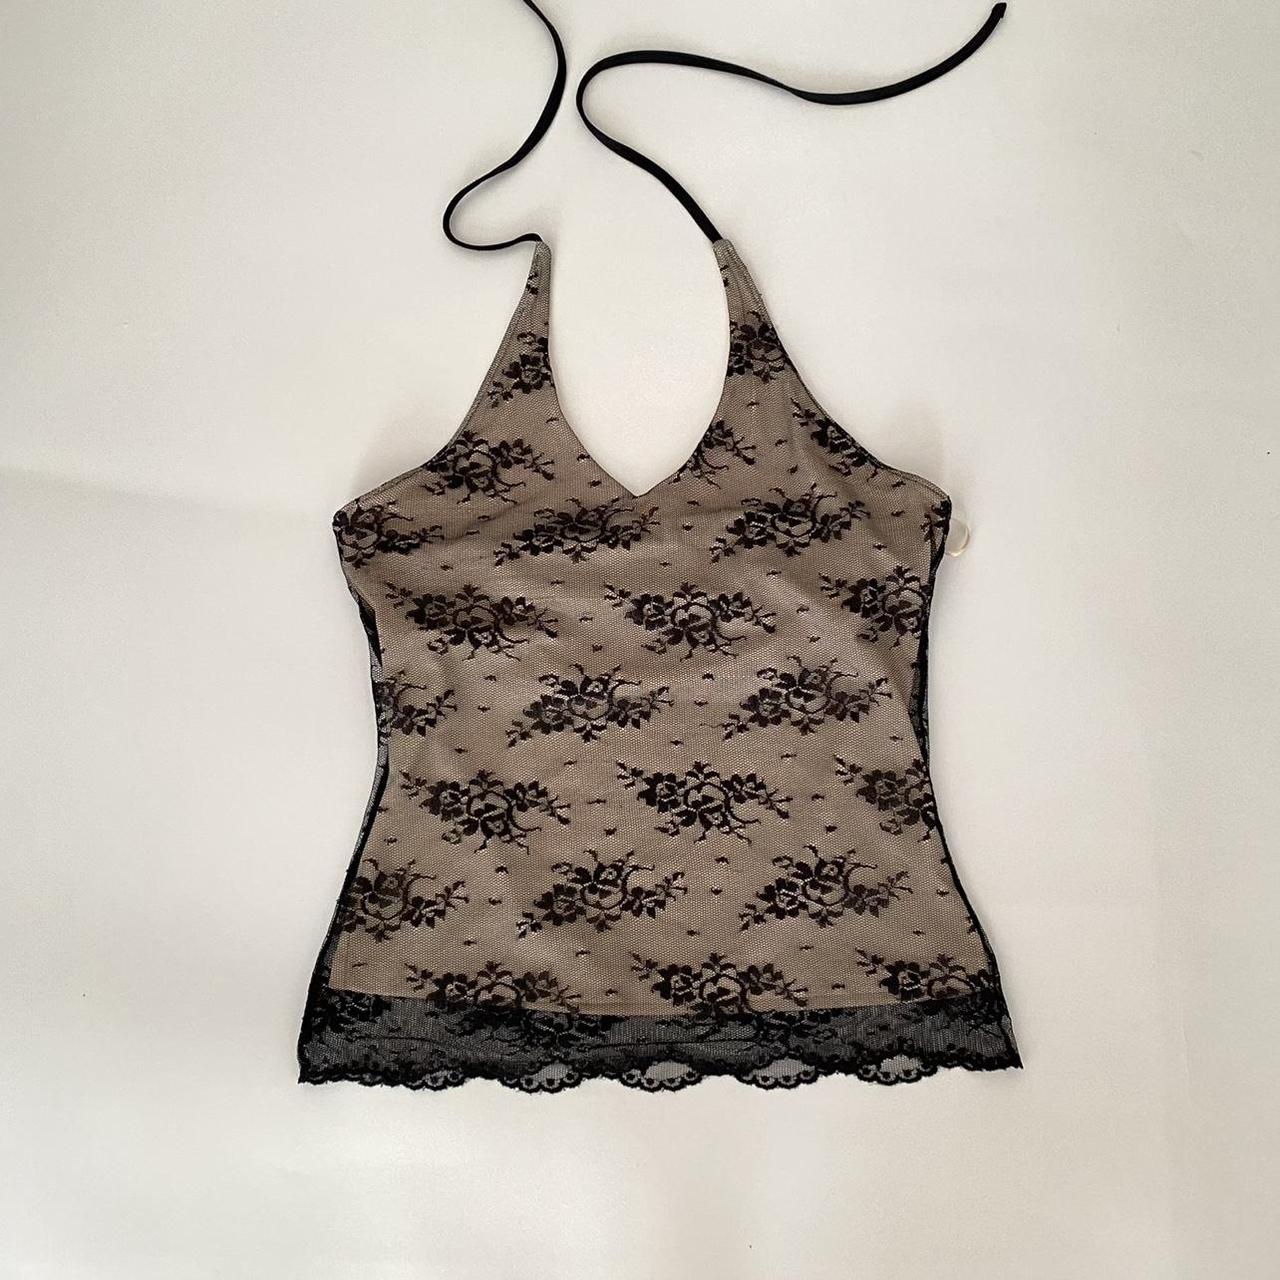 Y2K lace mesh halter cami top by The Limited 🍓Black... - Depop